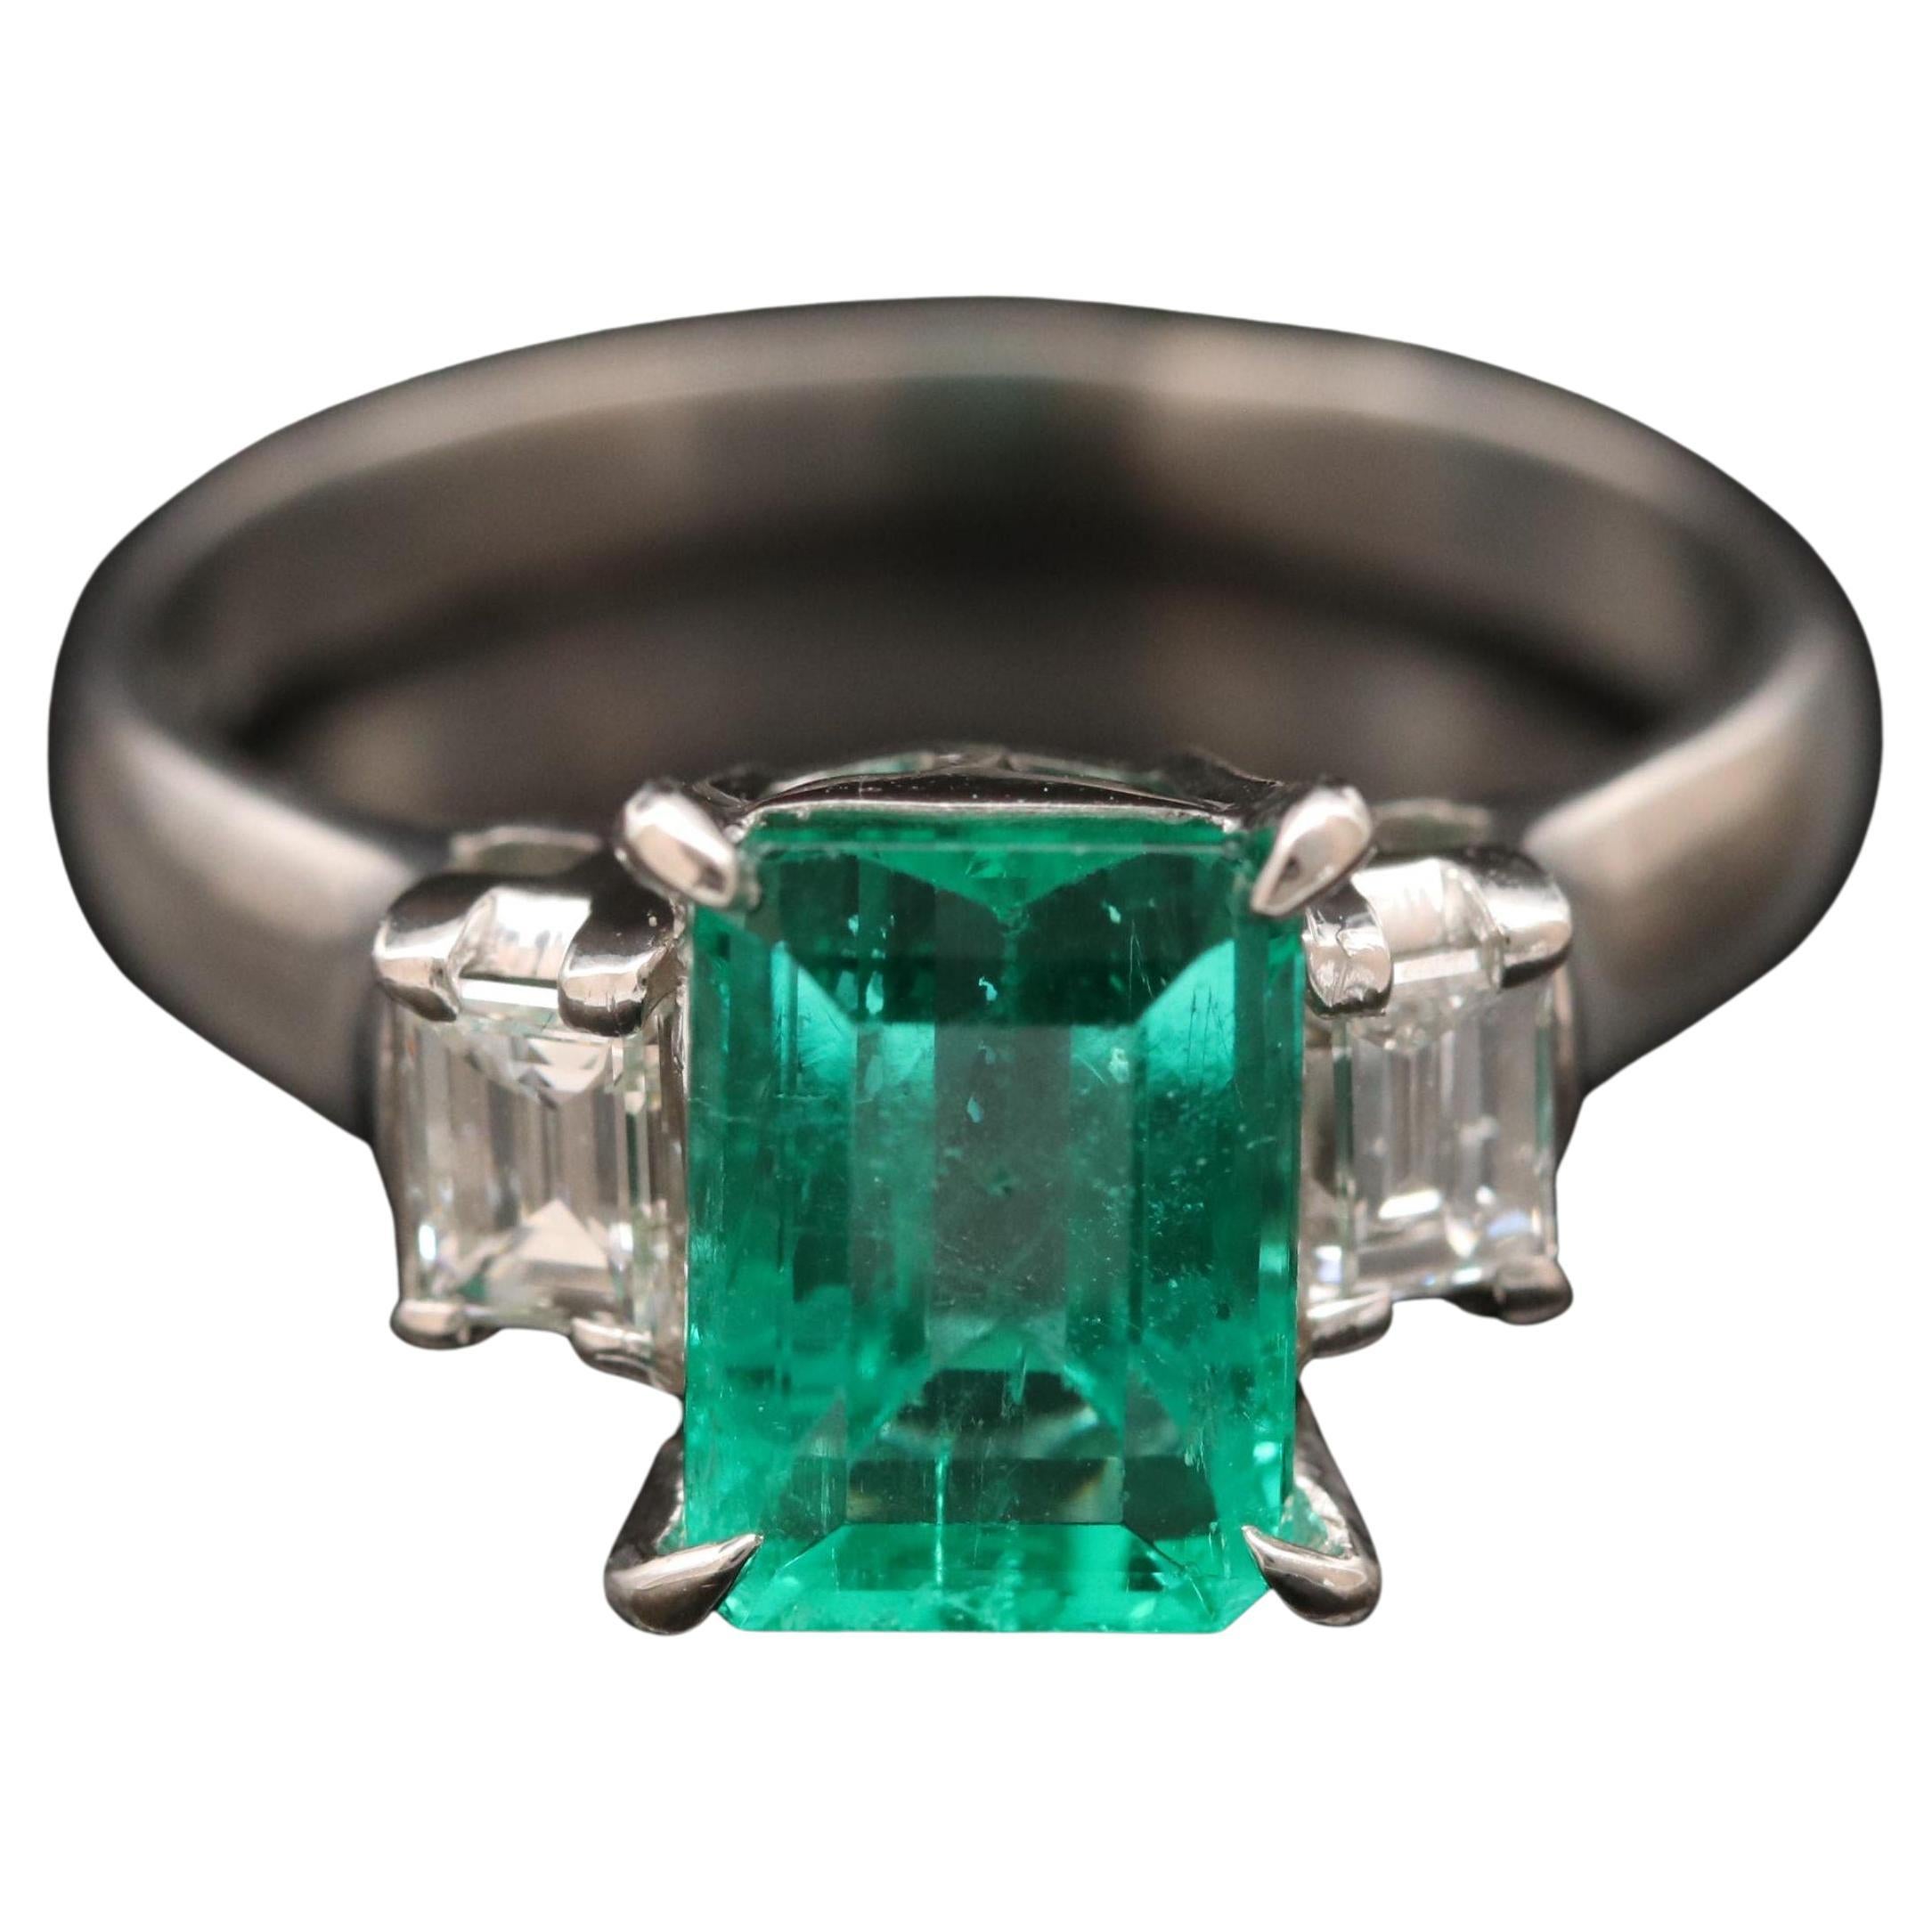 For Sale:  Certified 2 CT Untreated Natural Emerald Diamond Engagement Ring in 18K Gold